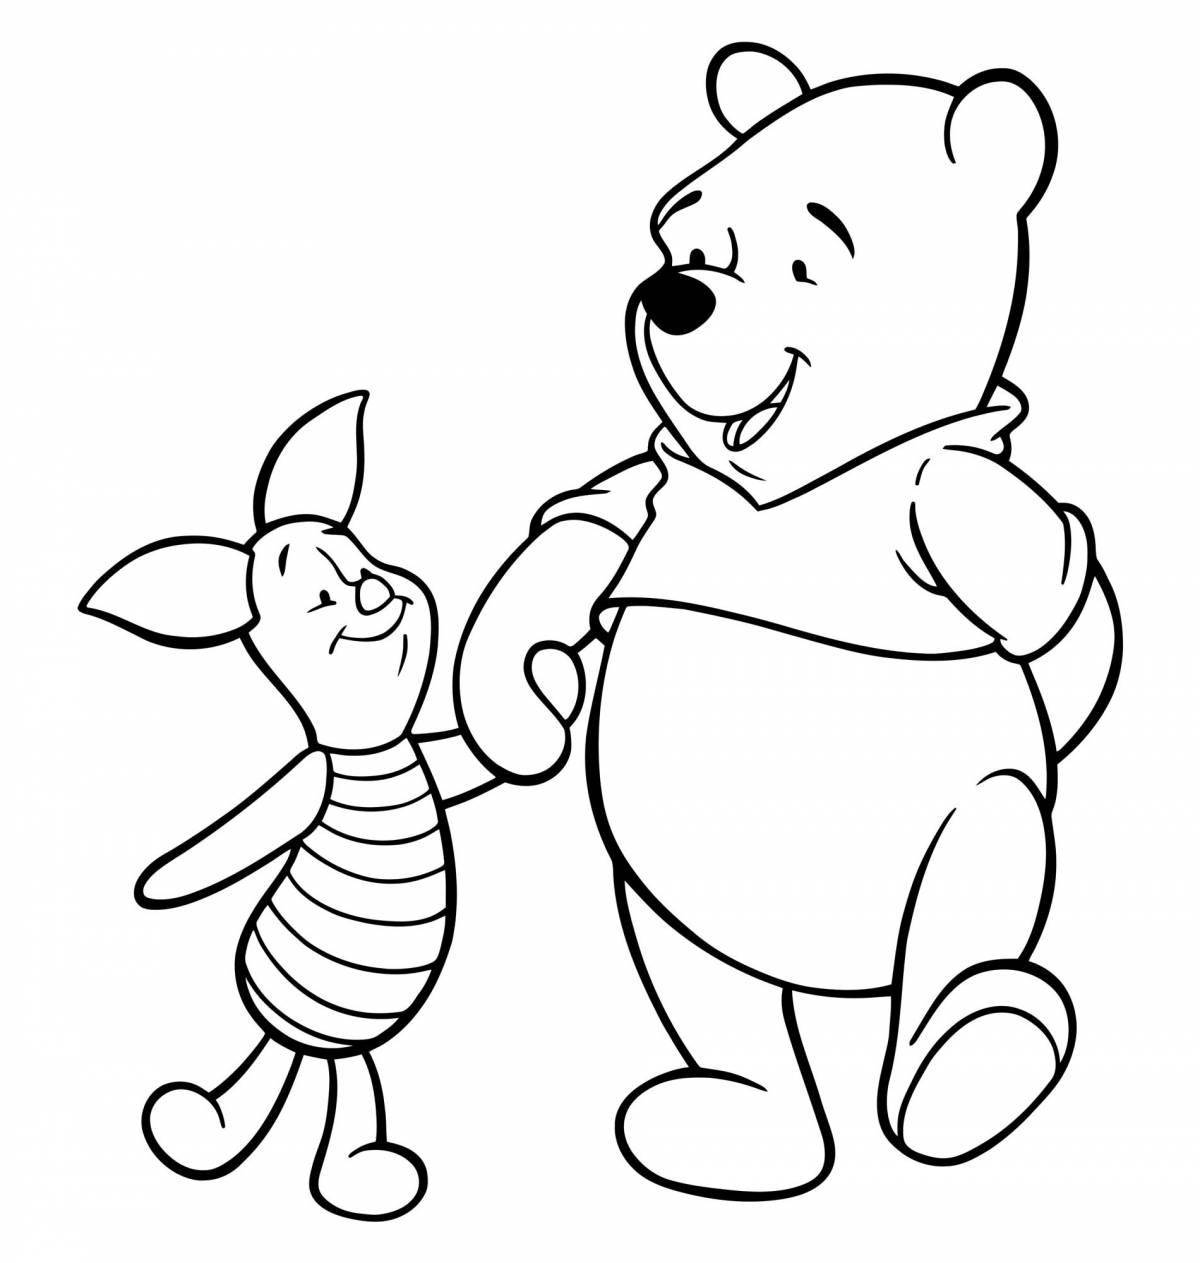 Fancy winnie the pooh coloring page